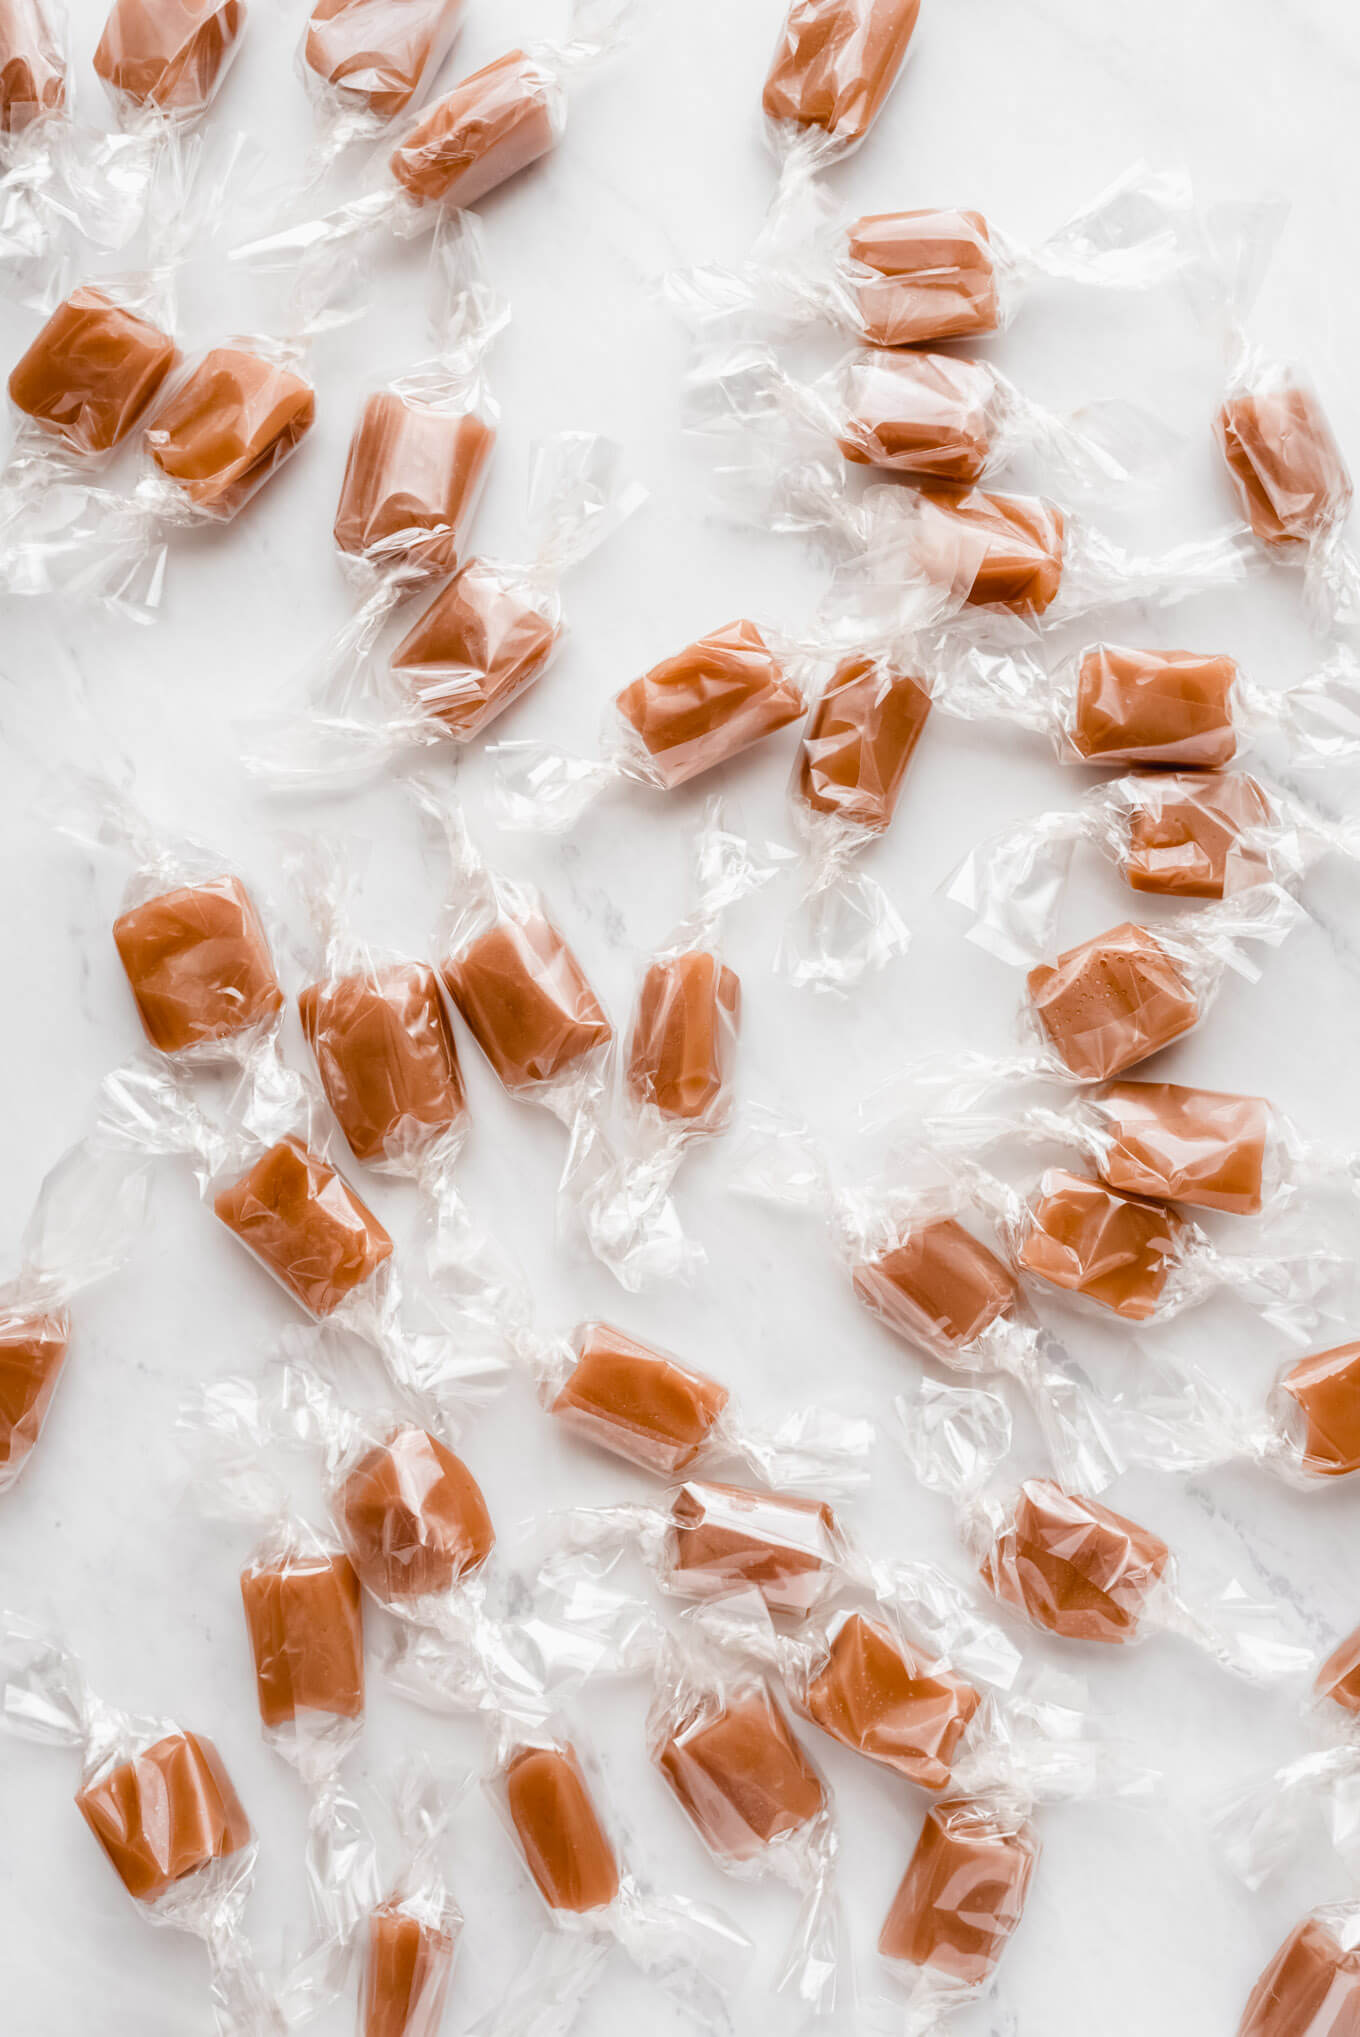 Many of Homemade Caramels wrapped in cellophane on a marble surface.